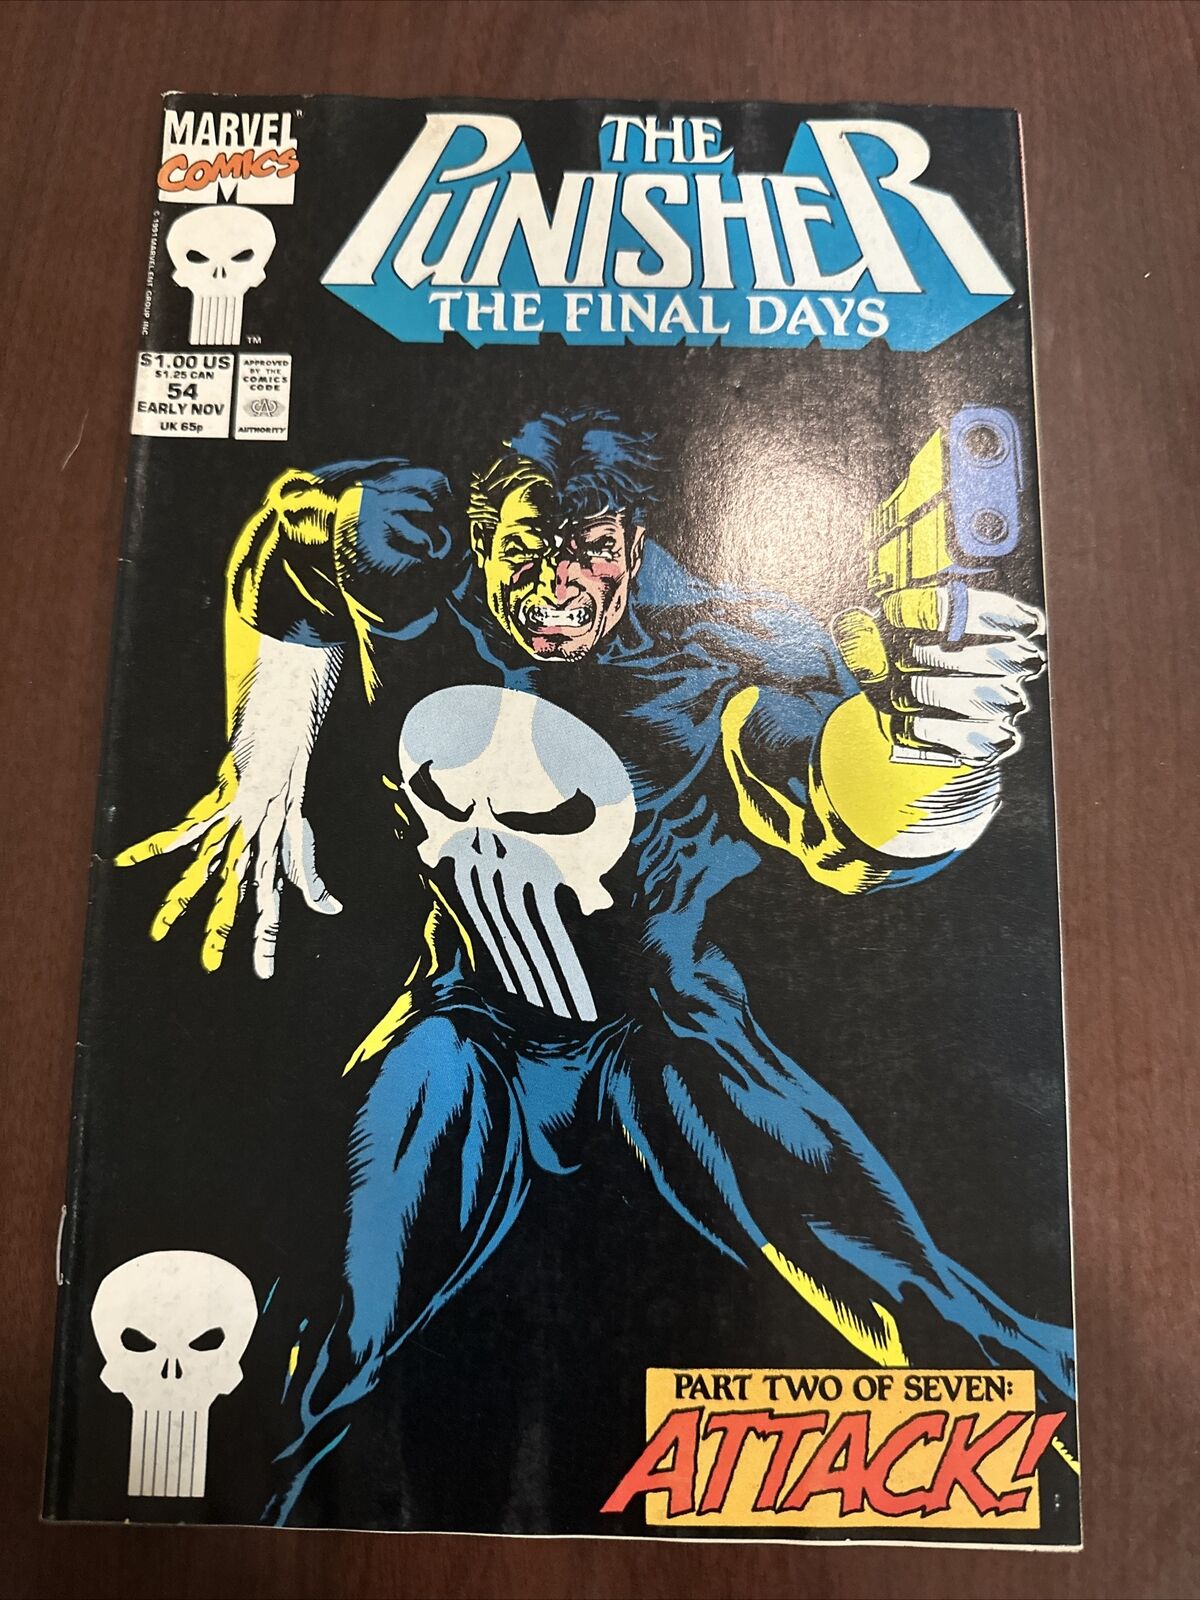 Punisher (1987 series) #54 in Near Mint minus condition.